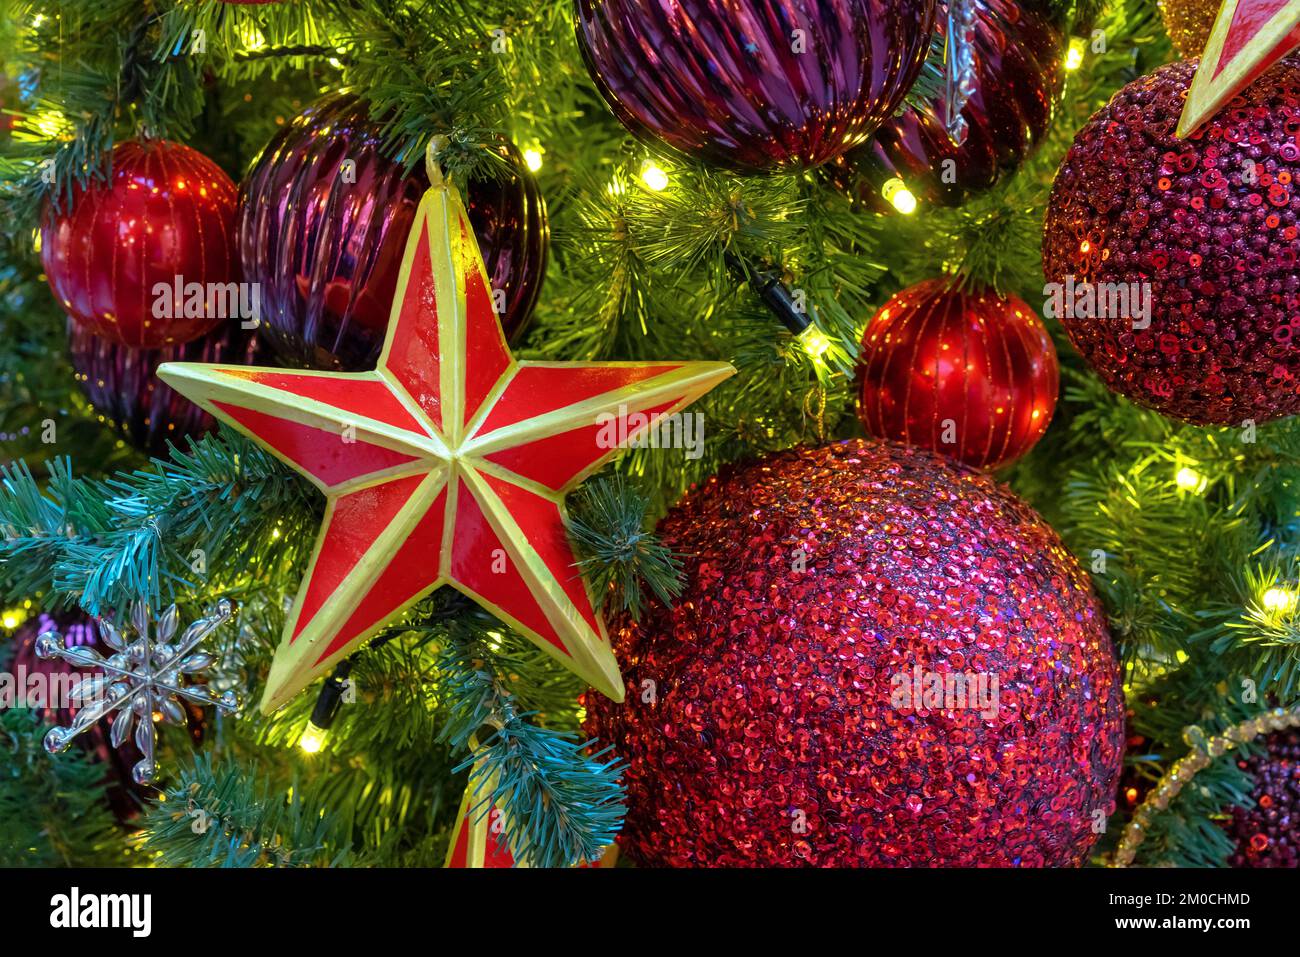 Five-pointed red star with a golden border on the Christmas tree with garlands. Stock Photo